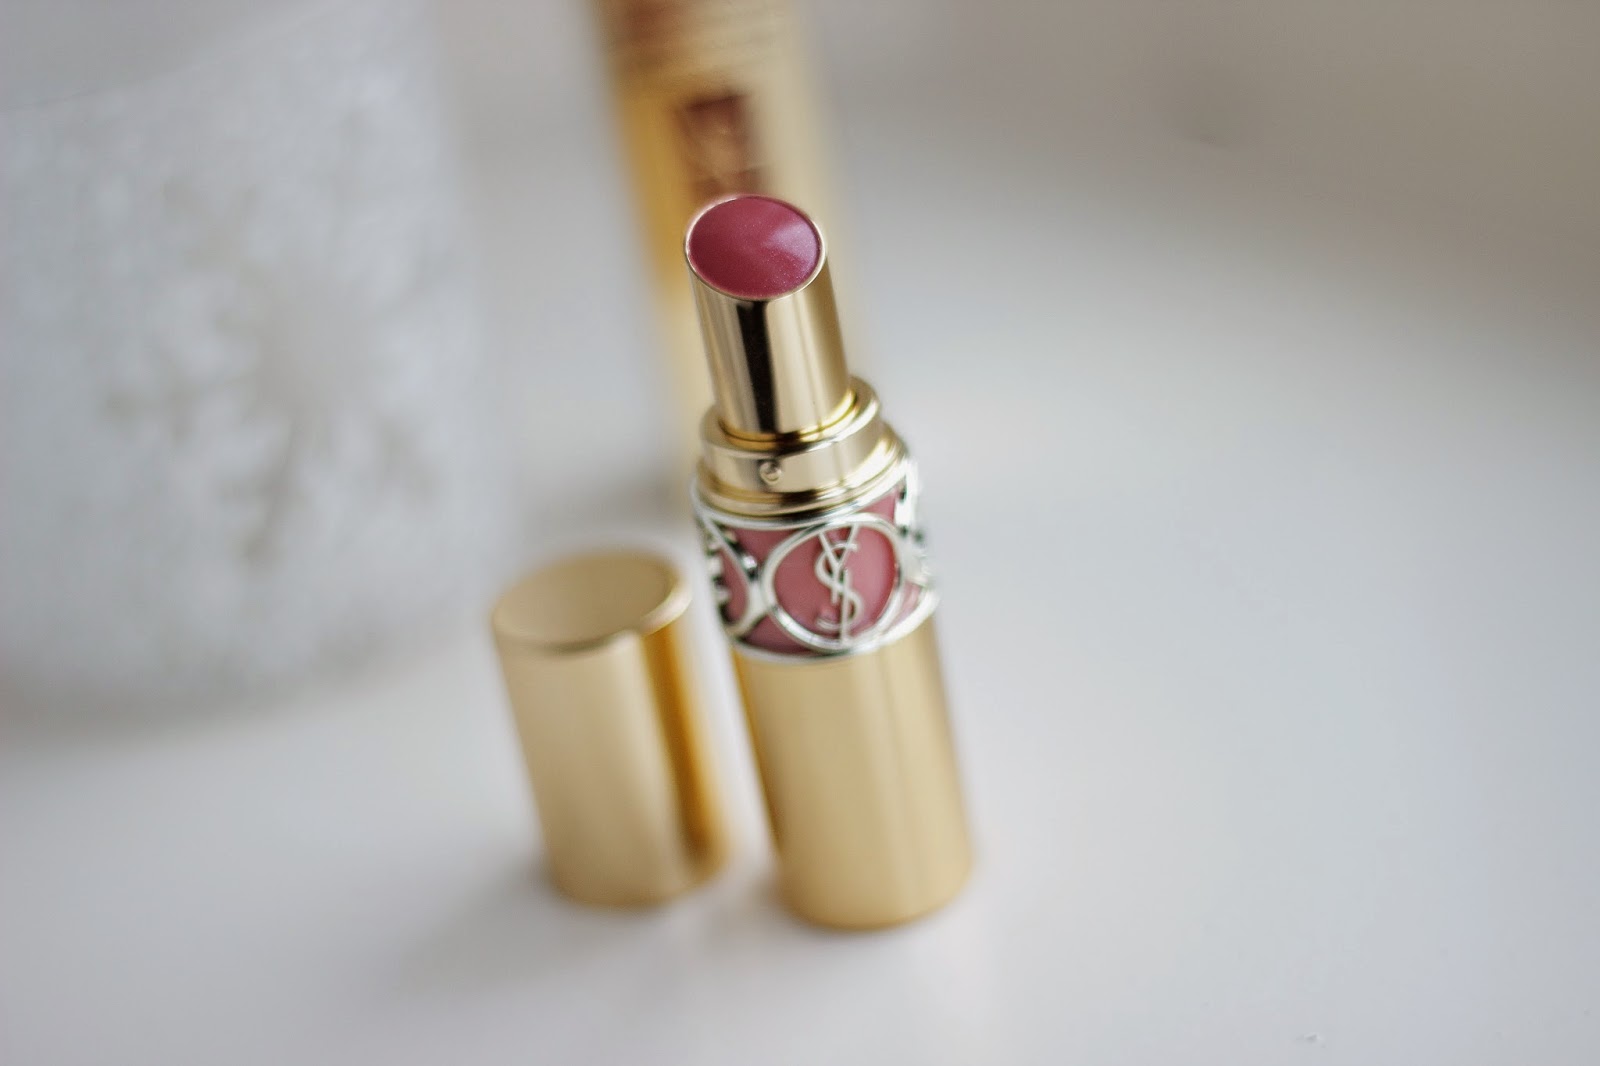 YSL Rouge Volupté Shine 8 Pink in confidence